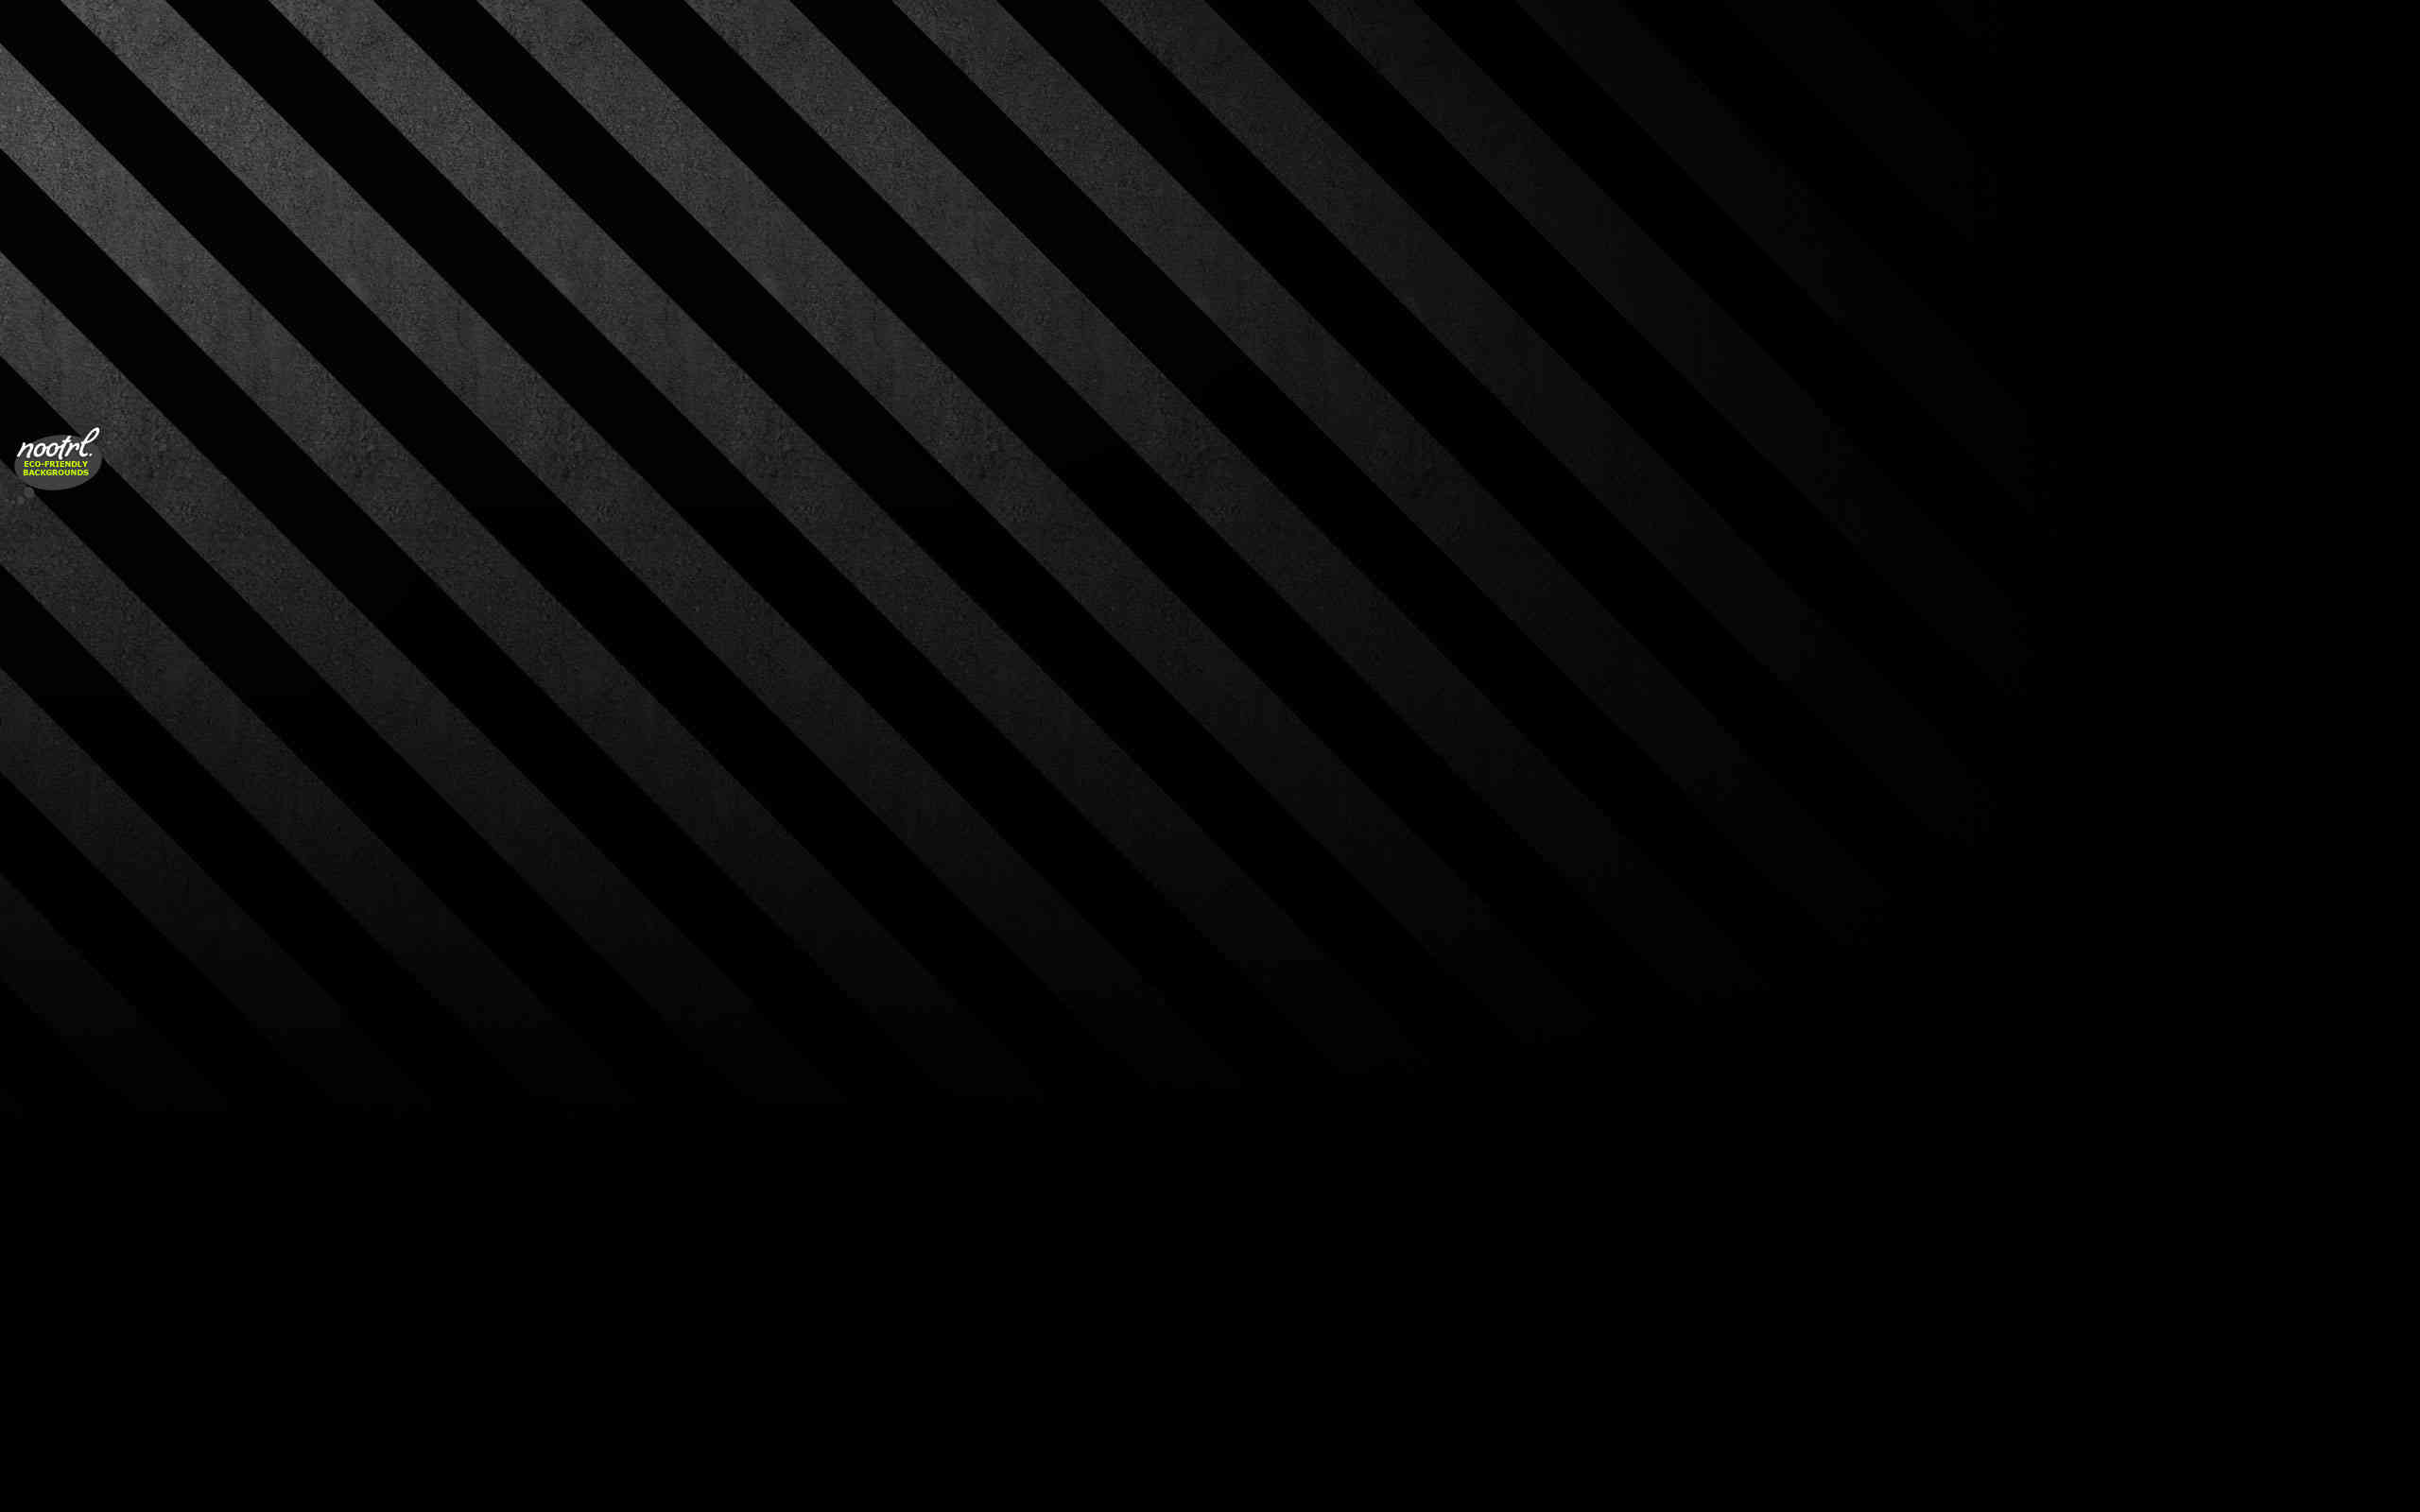  Black And Grey Striped Background Horizontal Black And Grey